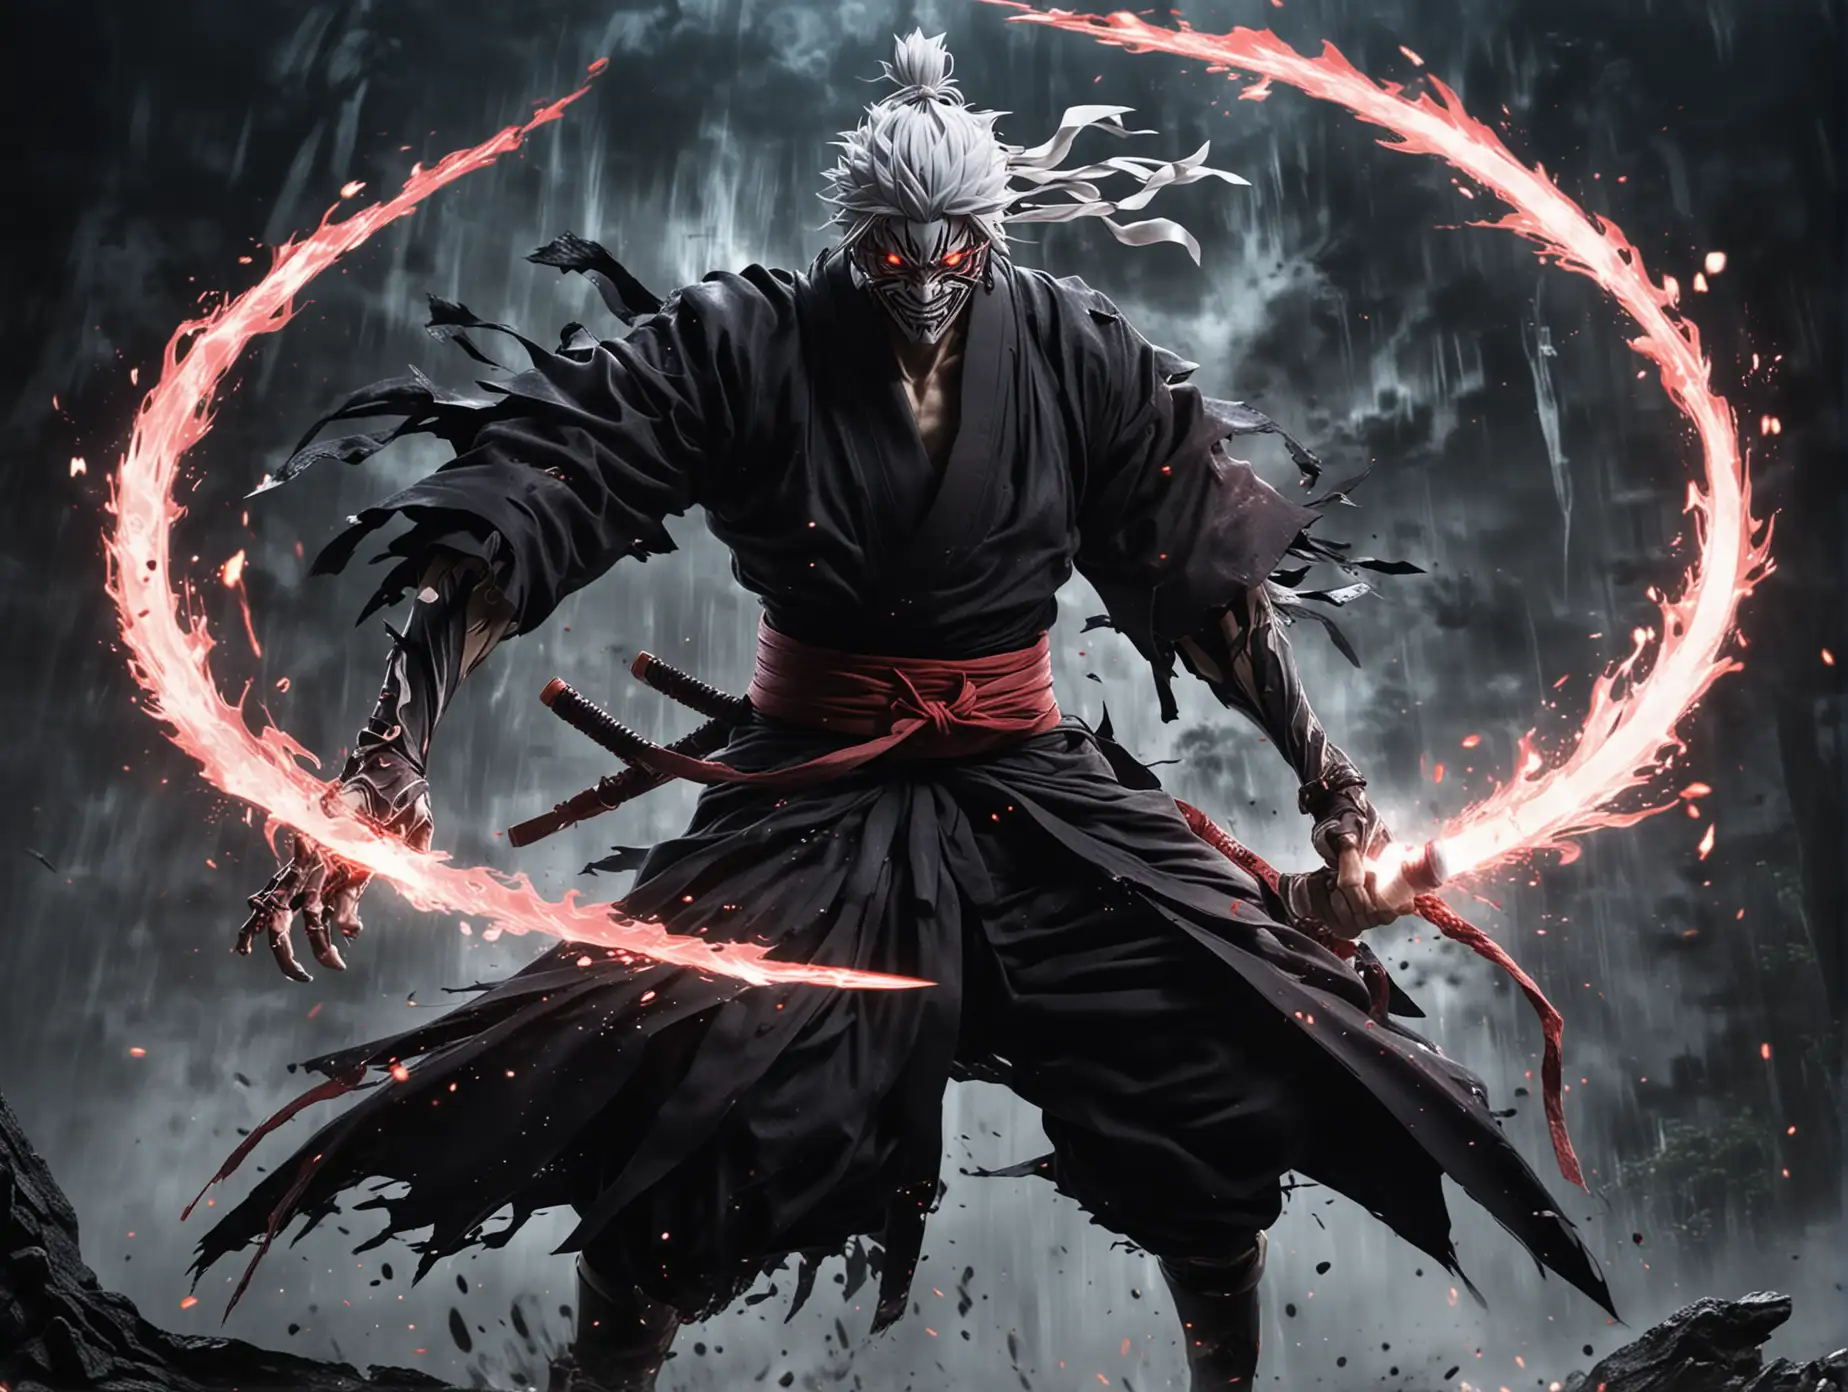 a photograph Kurosaki Ichigo raises his zanpakuto, Zangetsu, high above his head. The air around him crackles with energy as his spiritual pressure intensifies, causing the very ground to tremble beneath him.

With a fierce shout, Ichigo releases his zanpakuto's true form, unleashing the full extent of its power. Zangetsu transforms into a massive, black blade with a jagged edge, emanating a dark, ominous aura.

As Ichigo grips the hilt of his newly transformed zanpakuto, he takes on a more intimidating appearance, his eyes glowing with determination. With a swift motion, he slashes through the air, sending a powerful shockwave towards his opponent.

The force of Ichigo's bankai is overwhelming, as he charges forward with incredible speed and strength. His movements are fluid and precise, each strike calculated to deal maximum damage.

In this moment, Kurosaki Ichigo stands as a true warrior, a beacon of hope and strength in the face of adversity. His bankai is a testament to his resolve, a manifestation of his unwavering determination to protect those he cares about.